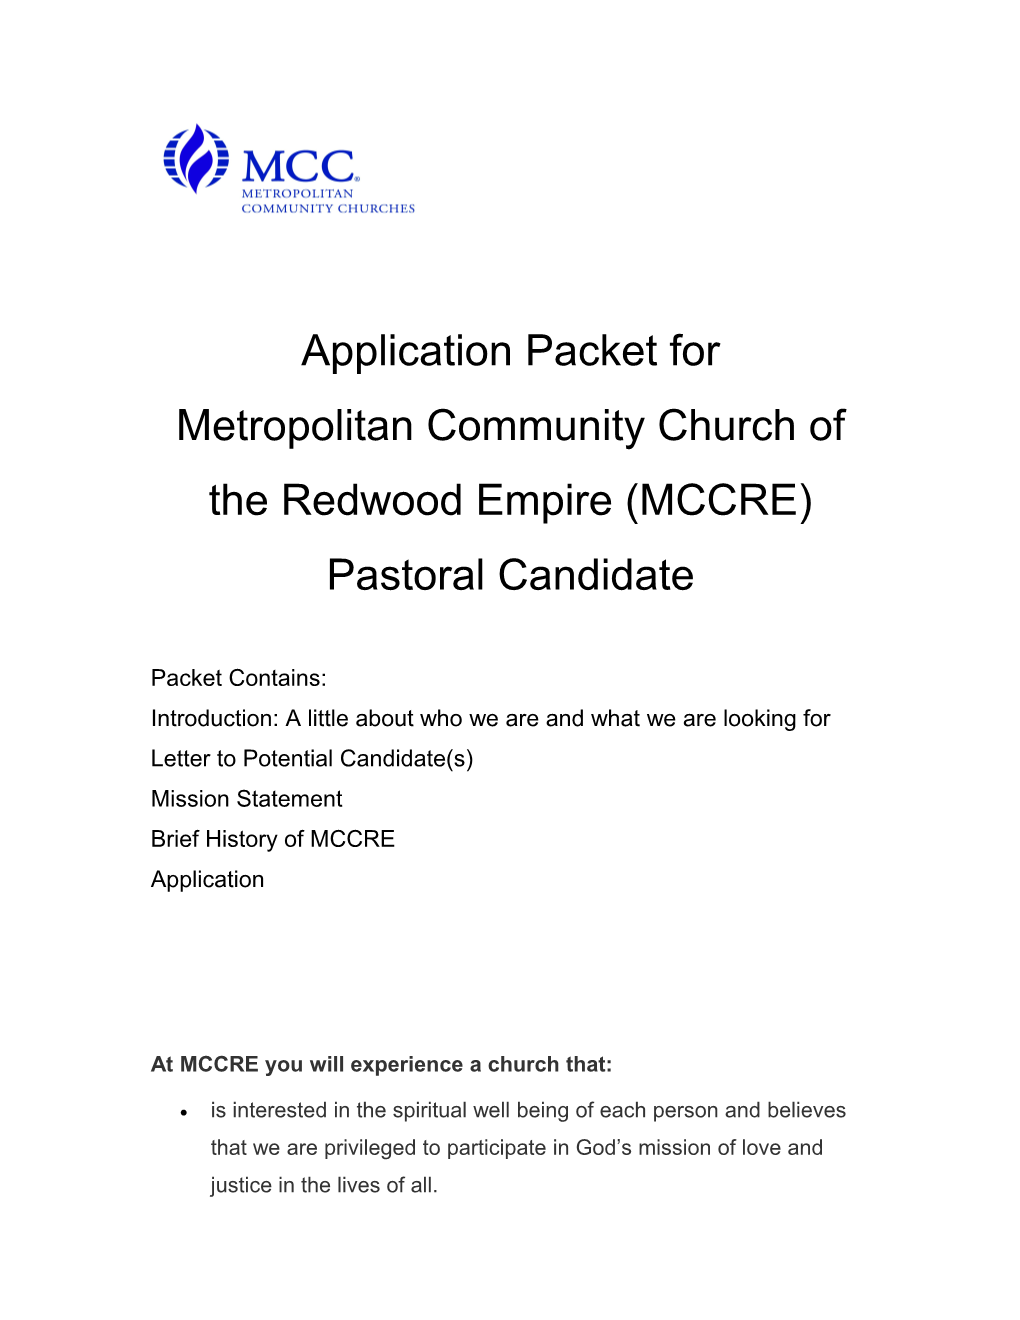 Metropolitan Community Church of the Redwood Empire (MCCRE) Pastoral Candidate